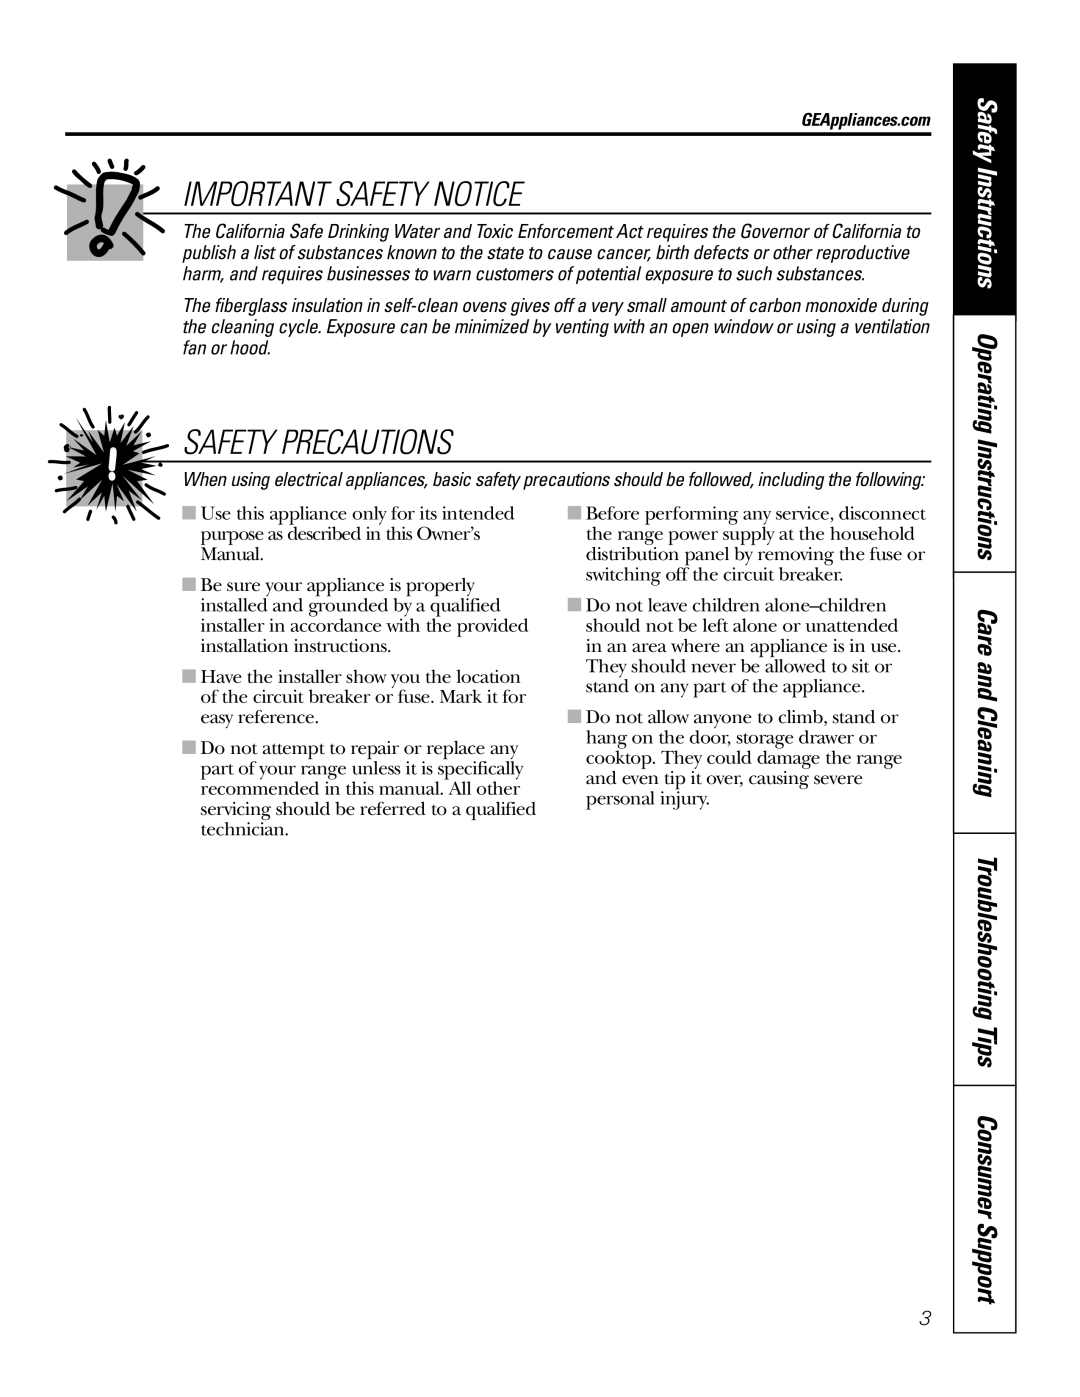 GE JBP91, 49-80117-1 Important Safety Notice, Safety Precautions, Care and Cleaning Troubleshooting Tips Consumer Support 